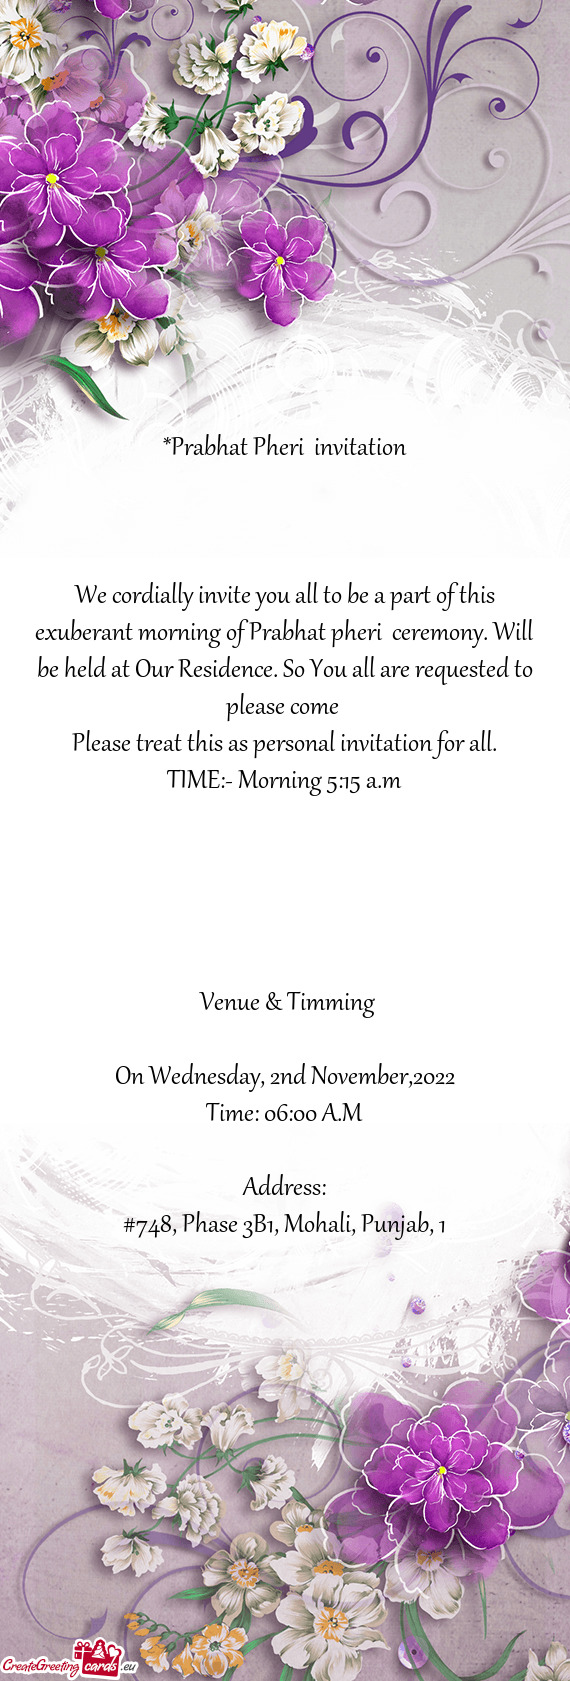 Be held at Our Residence. So You all are requested to please come